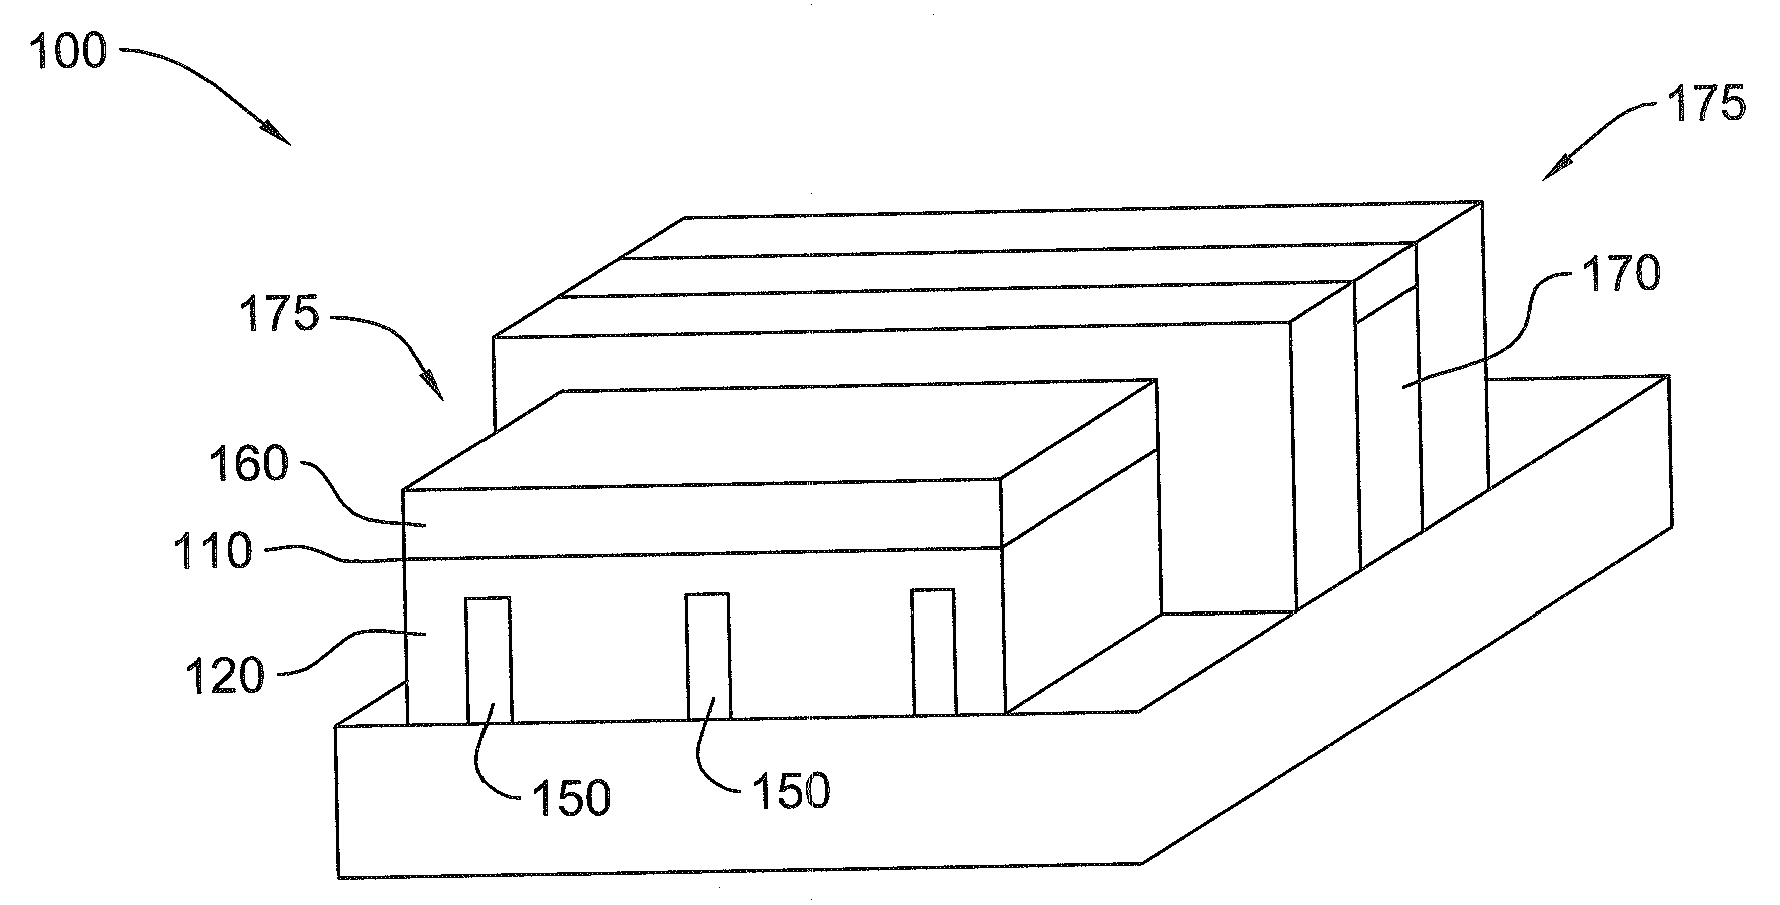 Fin-type field effect transistor structure with merged source/drain silicide and method of forming the structure